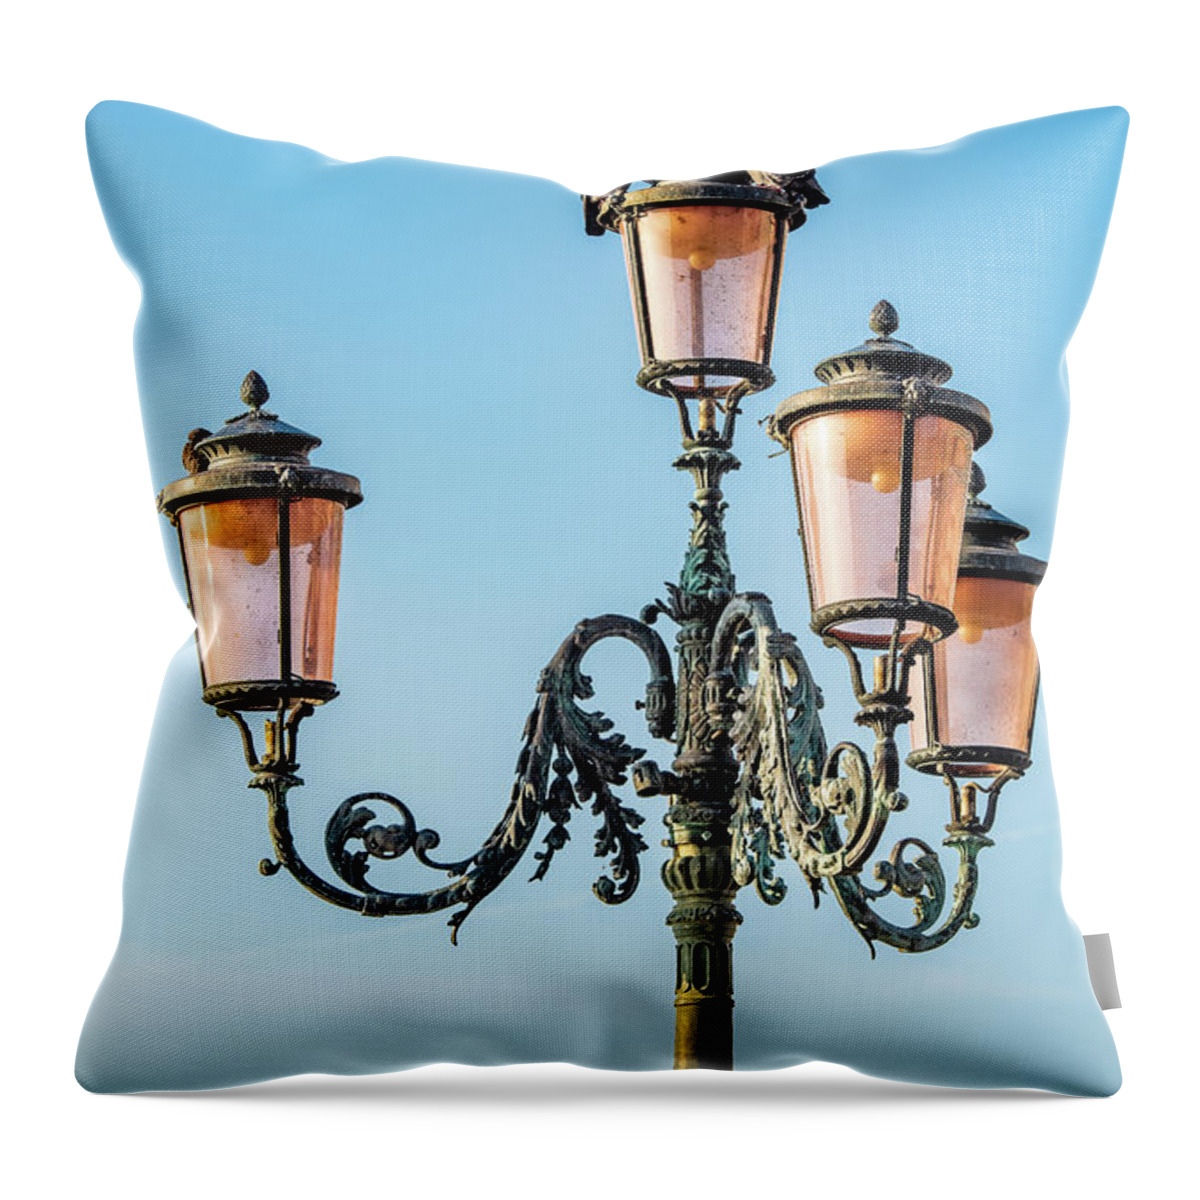 Italy Throw Pillow featuring the photograph Ornate Lighting by David Downs